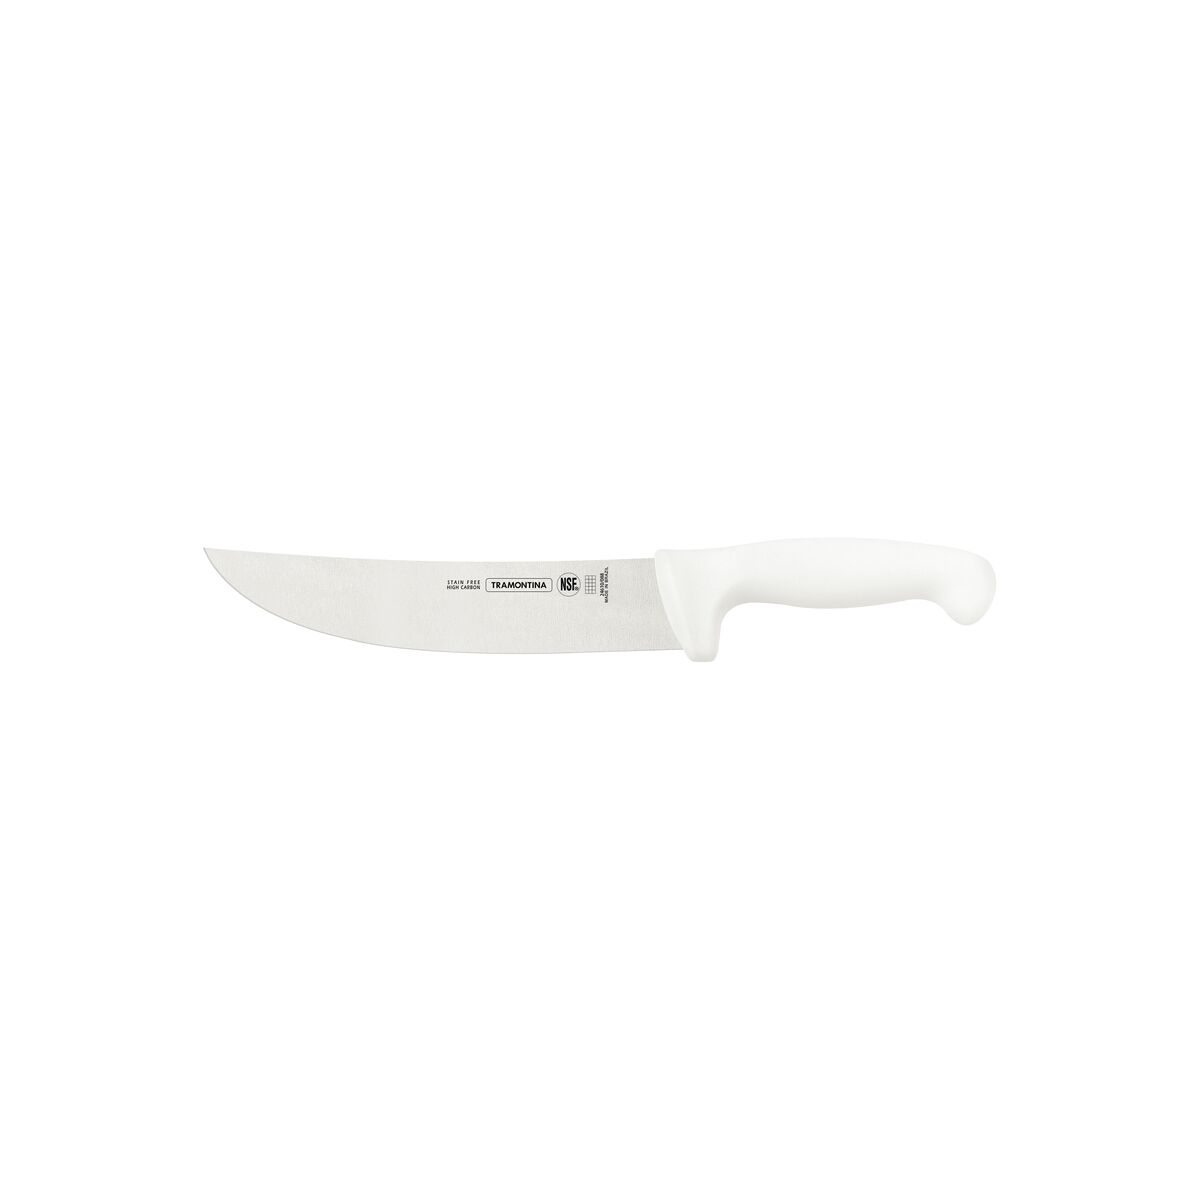 Tramontina Professional 8" Meat Knife with Stainless-Steel Blade and White Polypropylene Handle